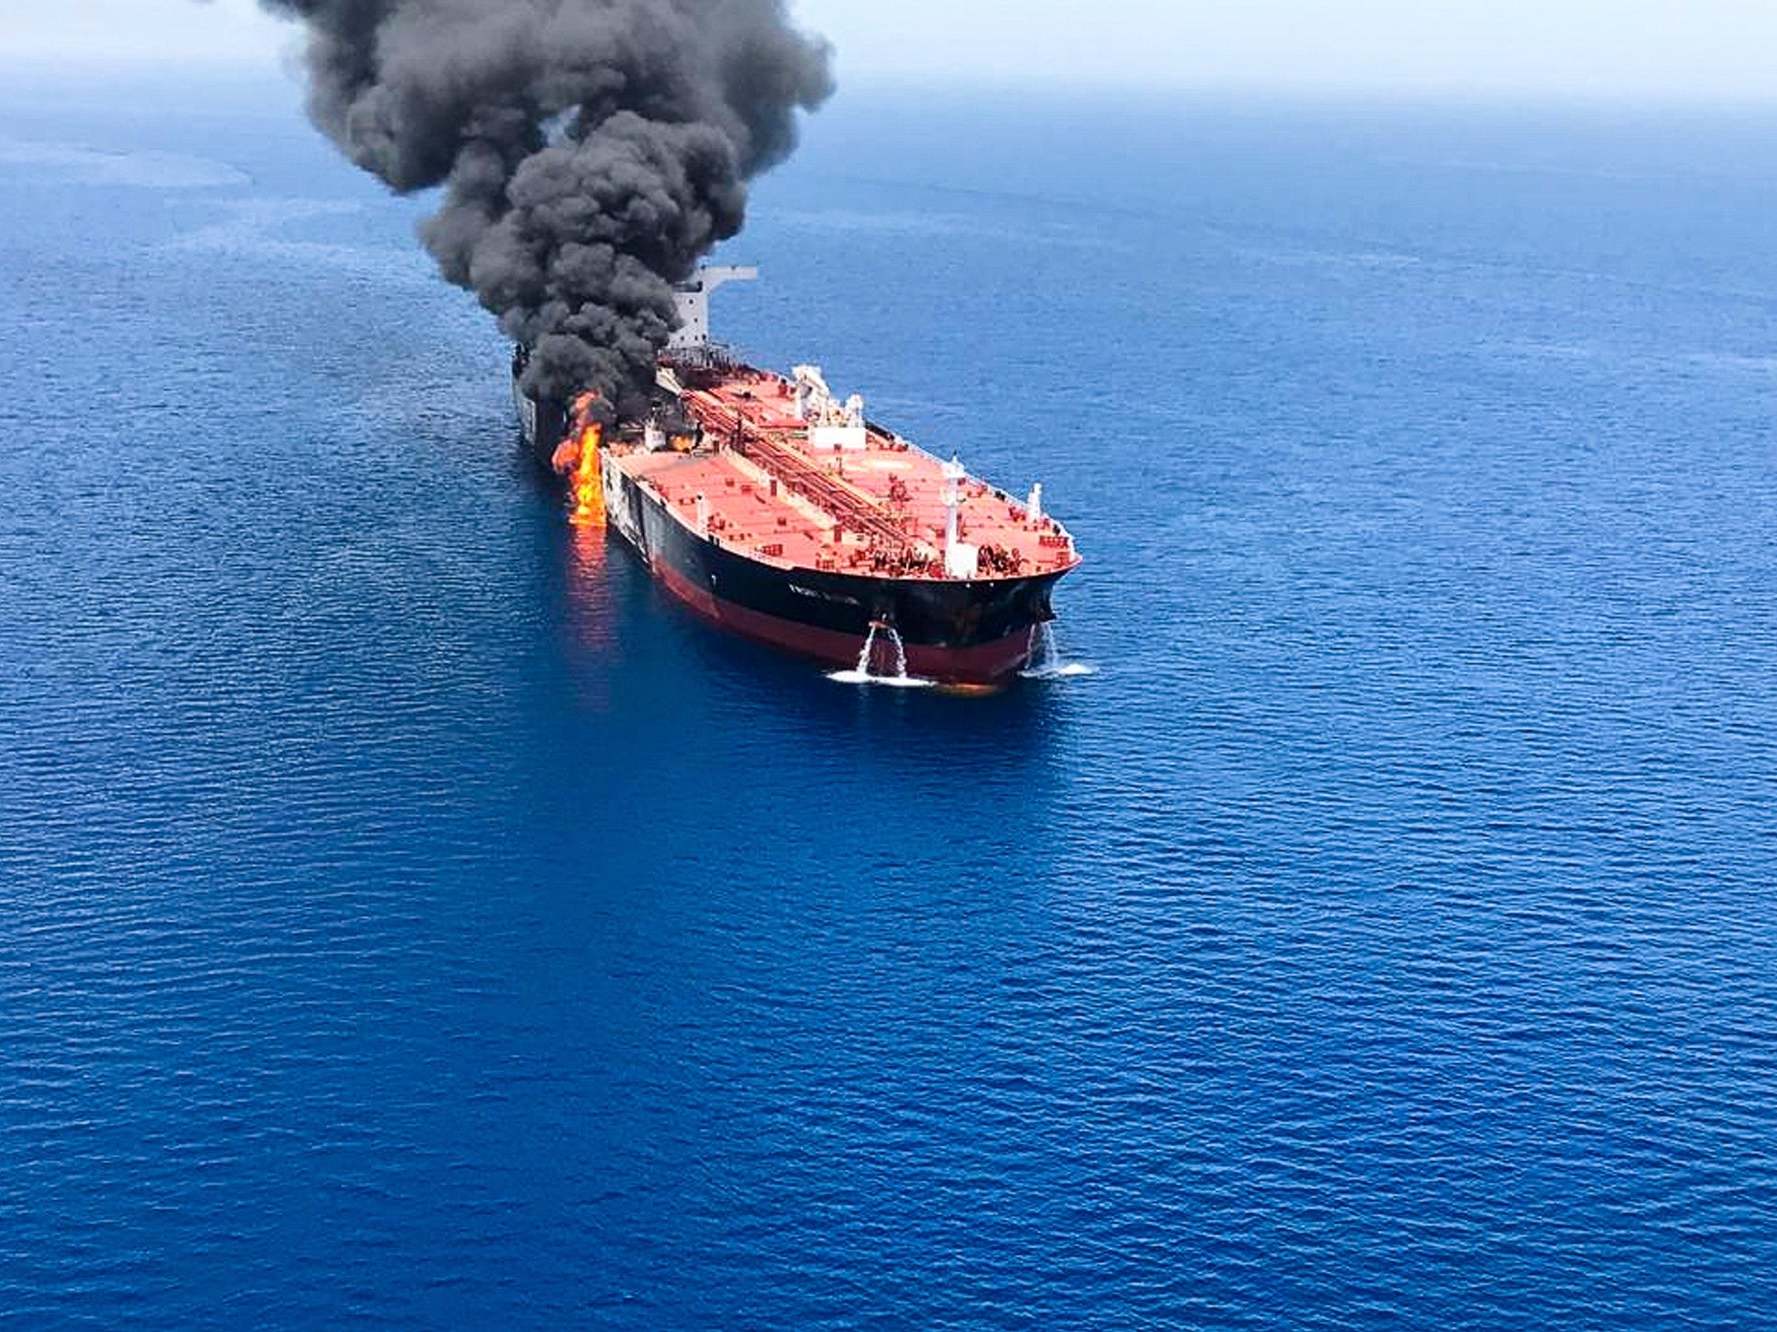 Arab League chief warns Iranians to 'be careful' after attack on oil tankers in Gulf of Oman